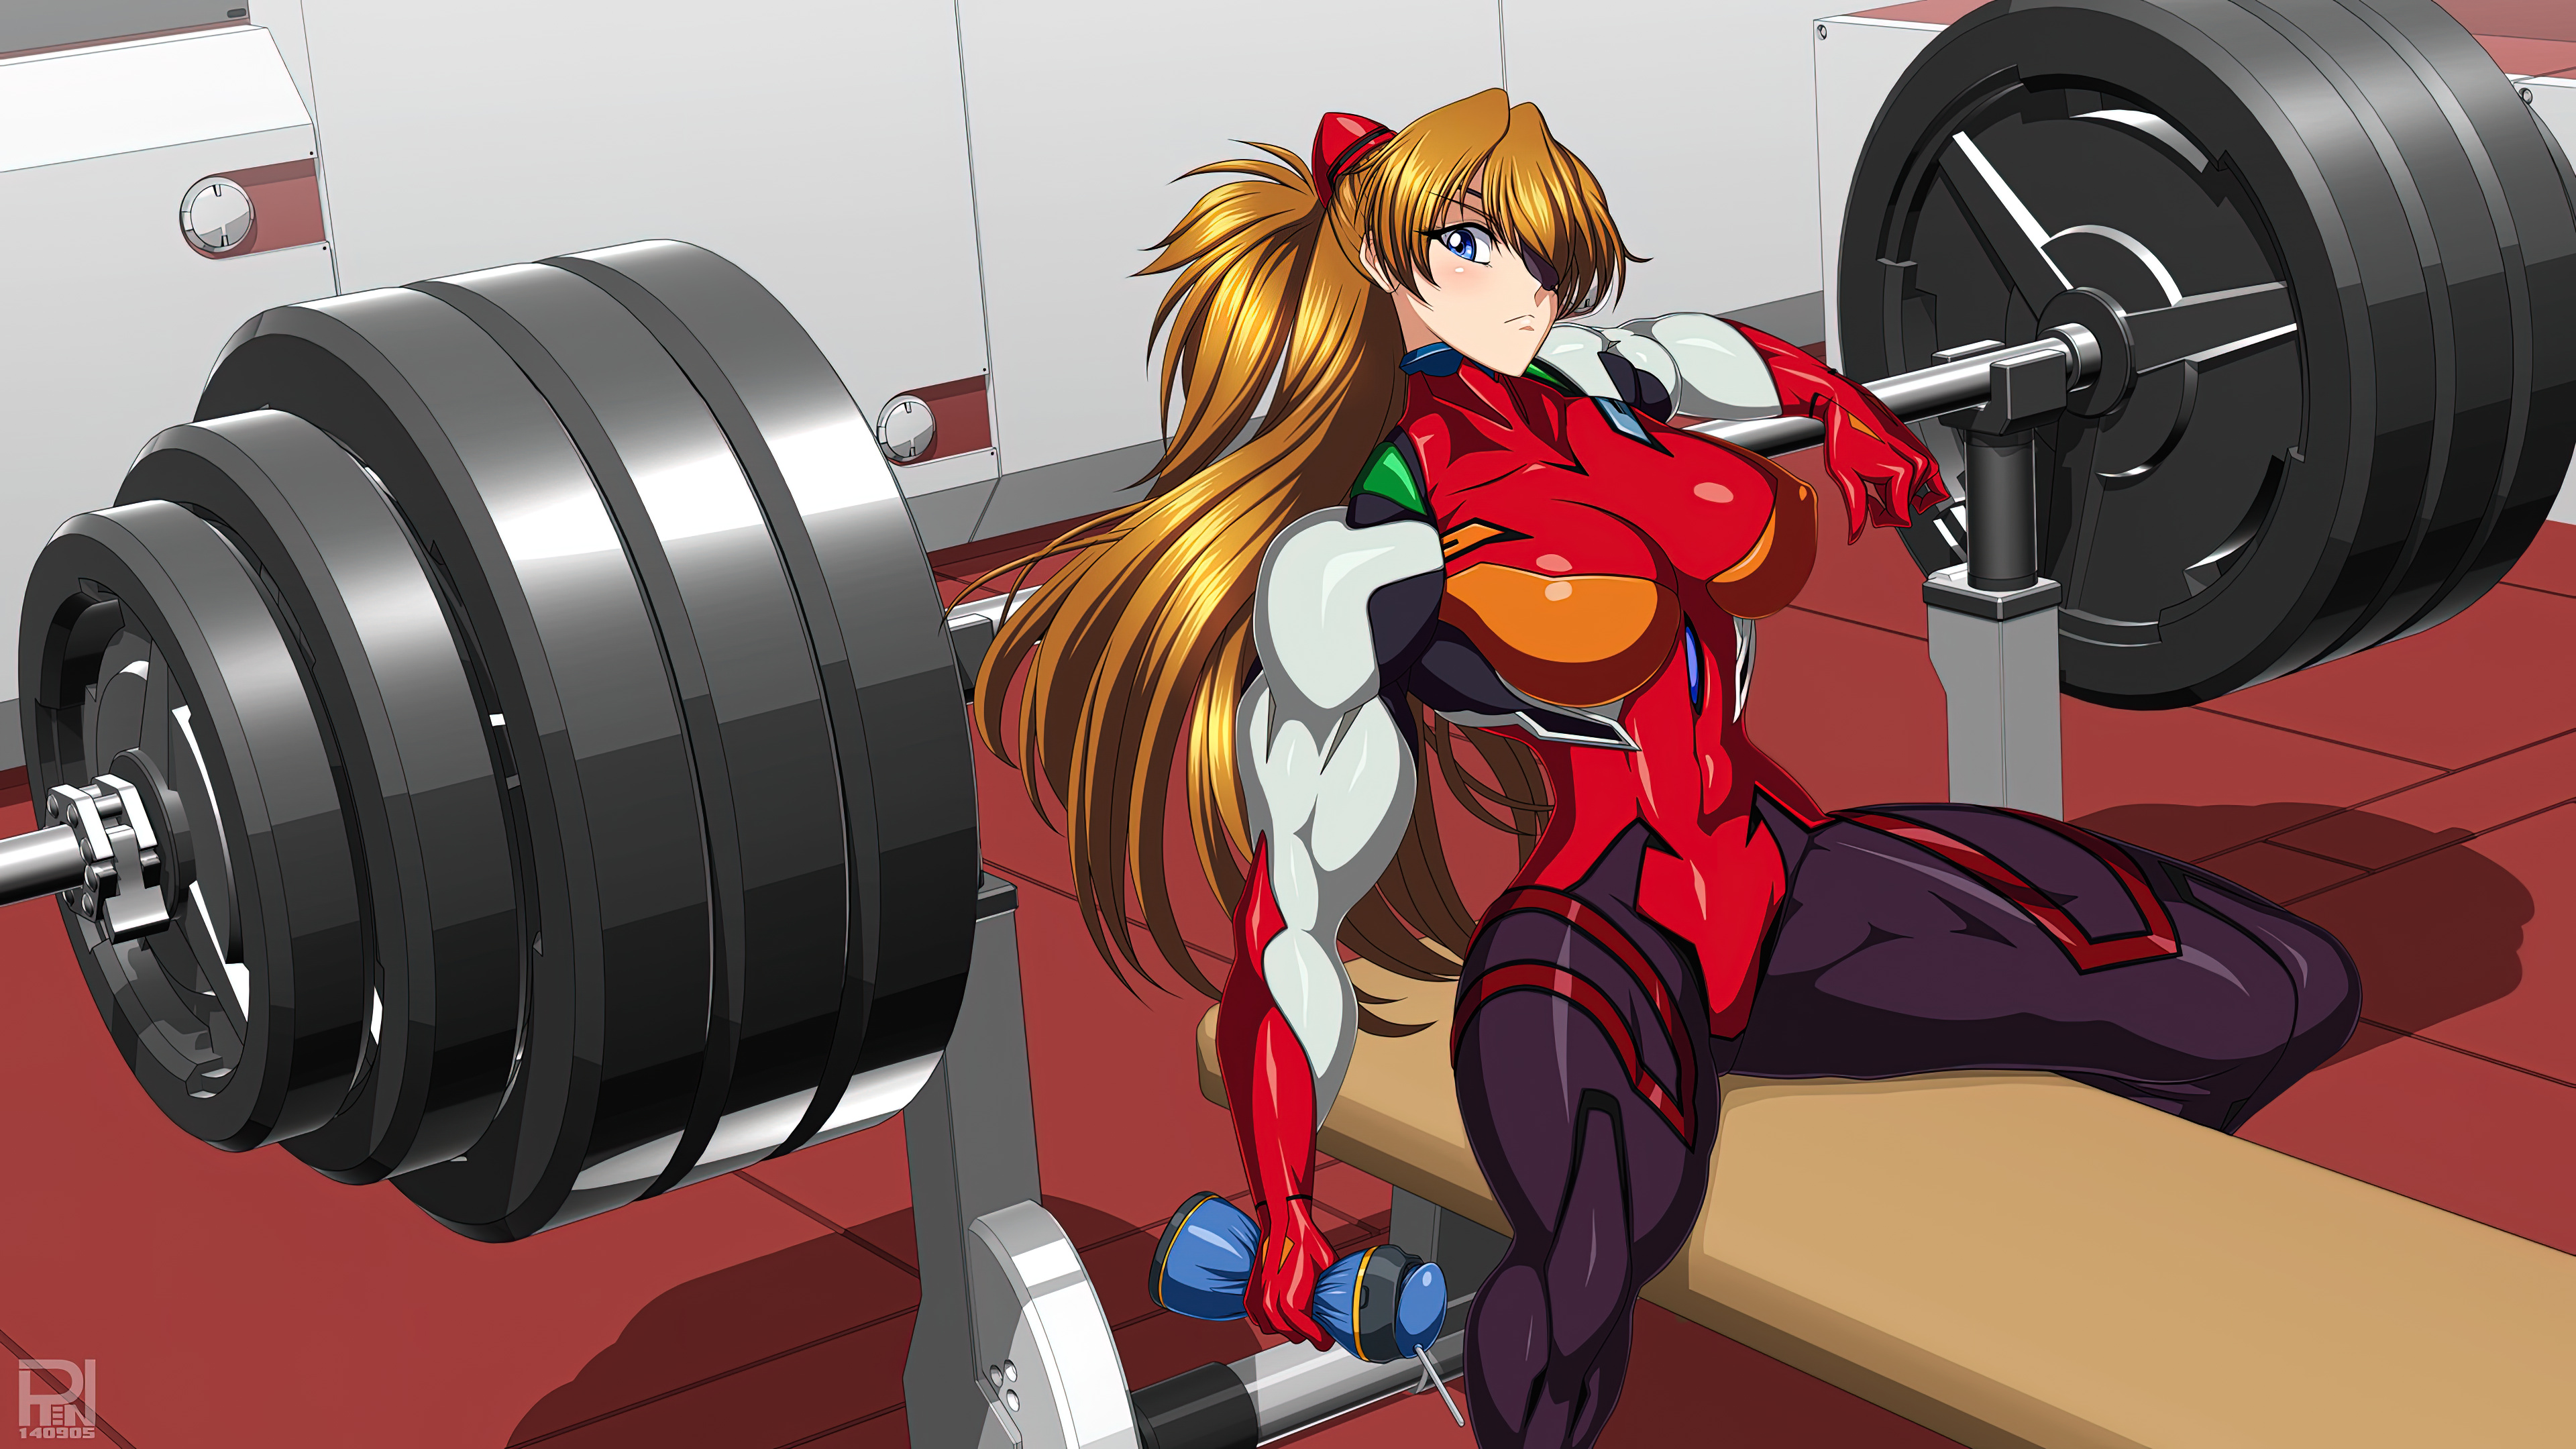 Anime 3840x2160 muscles muscular anime girls strong woman